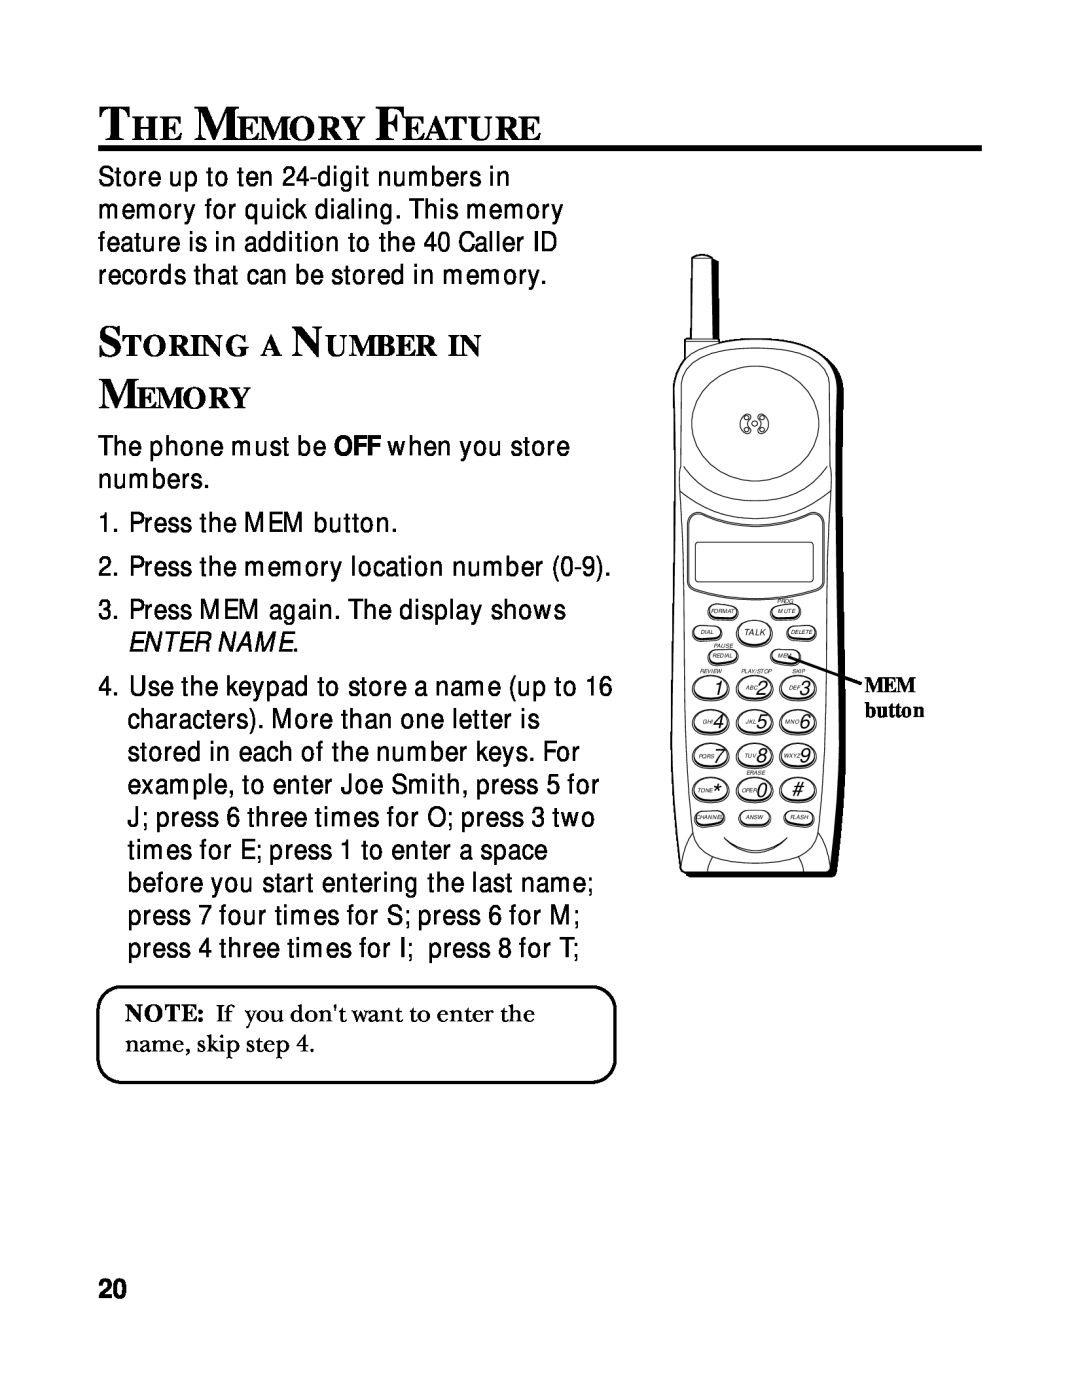 RCA 900 MHz manual The Memory Feature, Storing A Number In Memory, Enter Name 